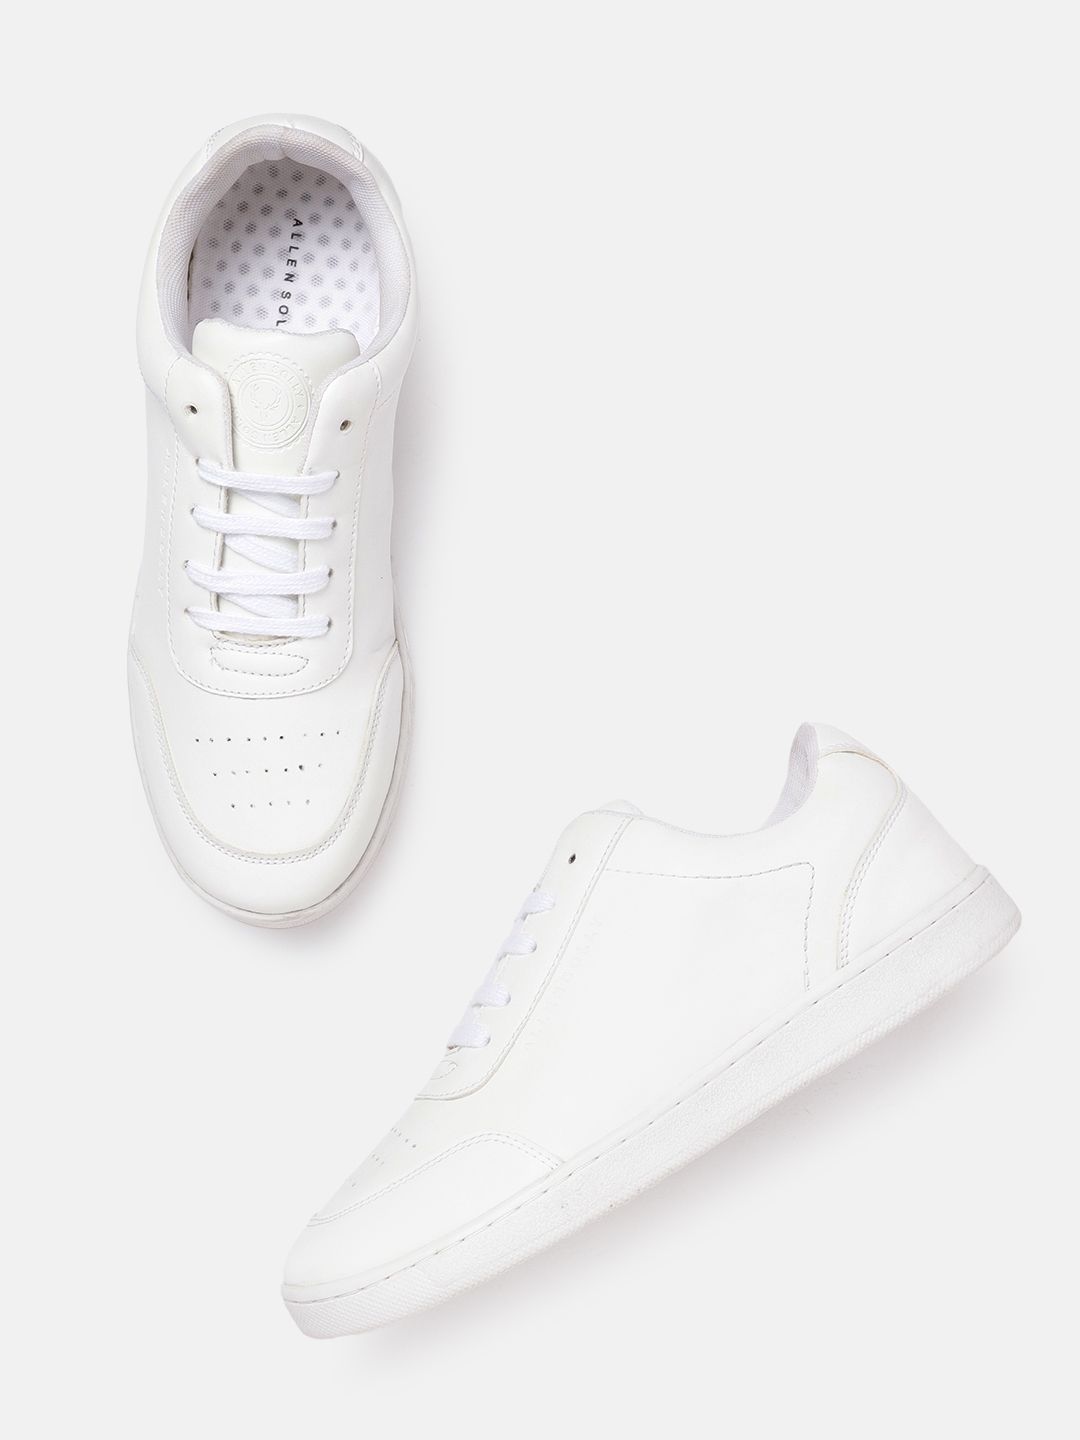 Allen Solly Women White Perforated Sneakers Price in India